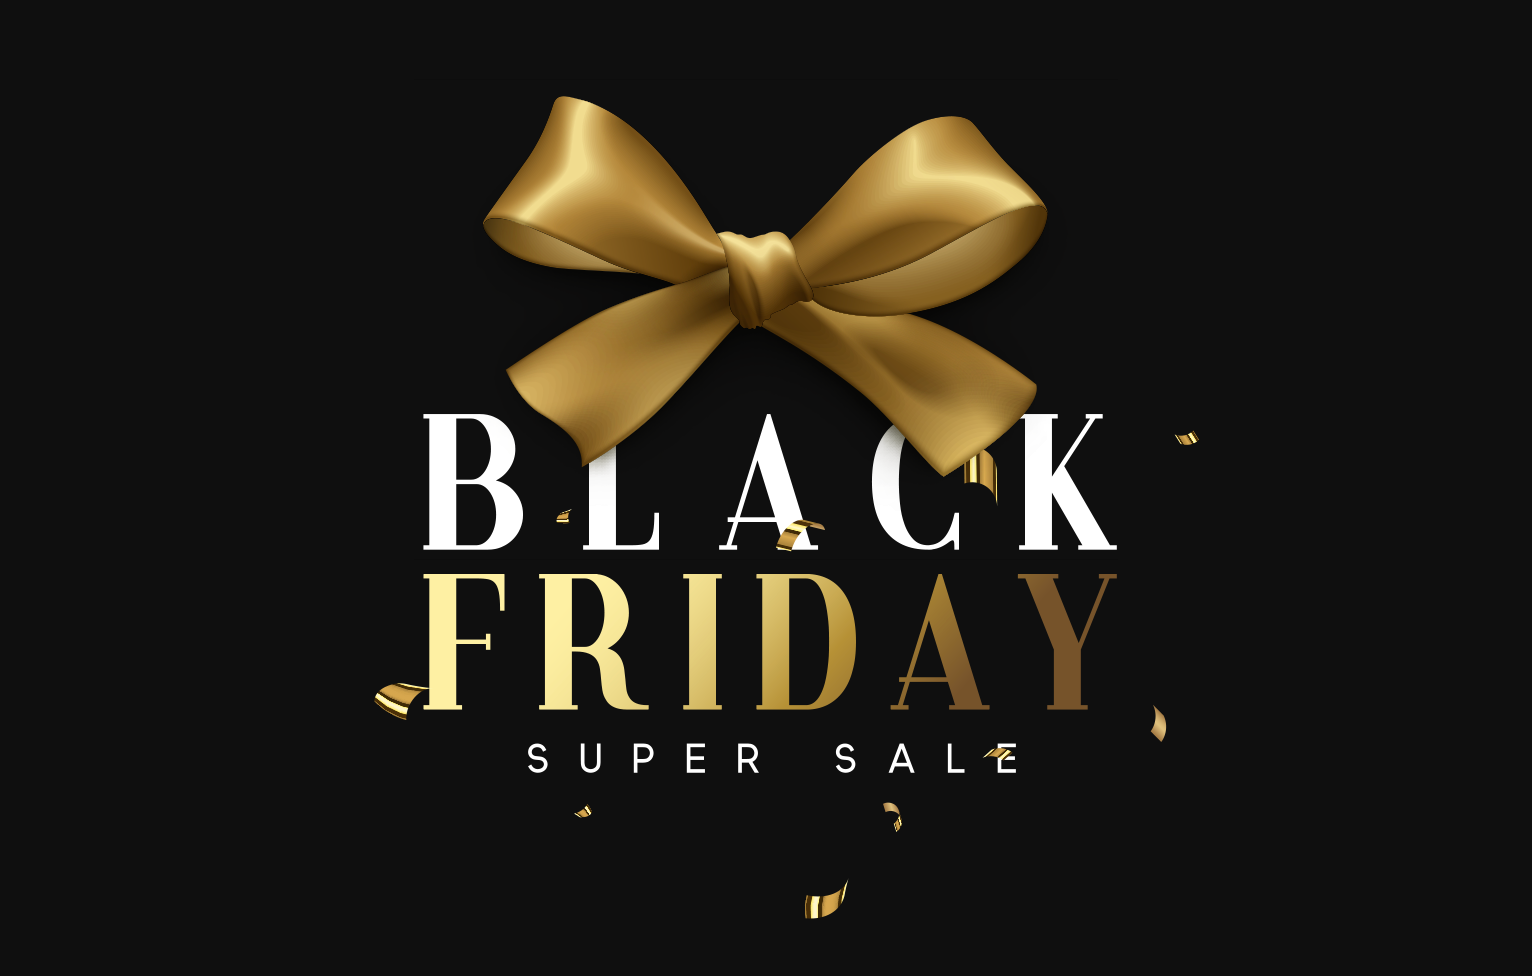 are you prepared for black friday marketing here are some strategies to consider for your black friday marketing efforts